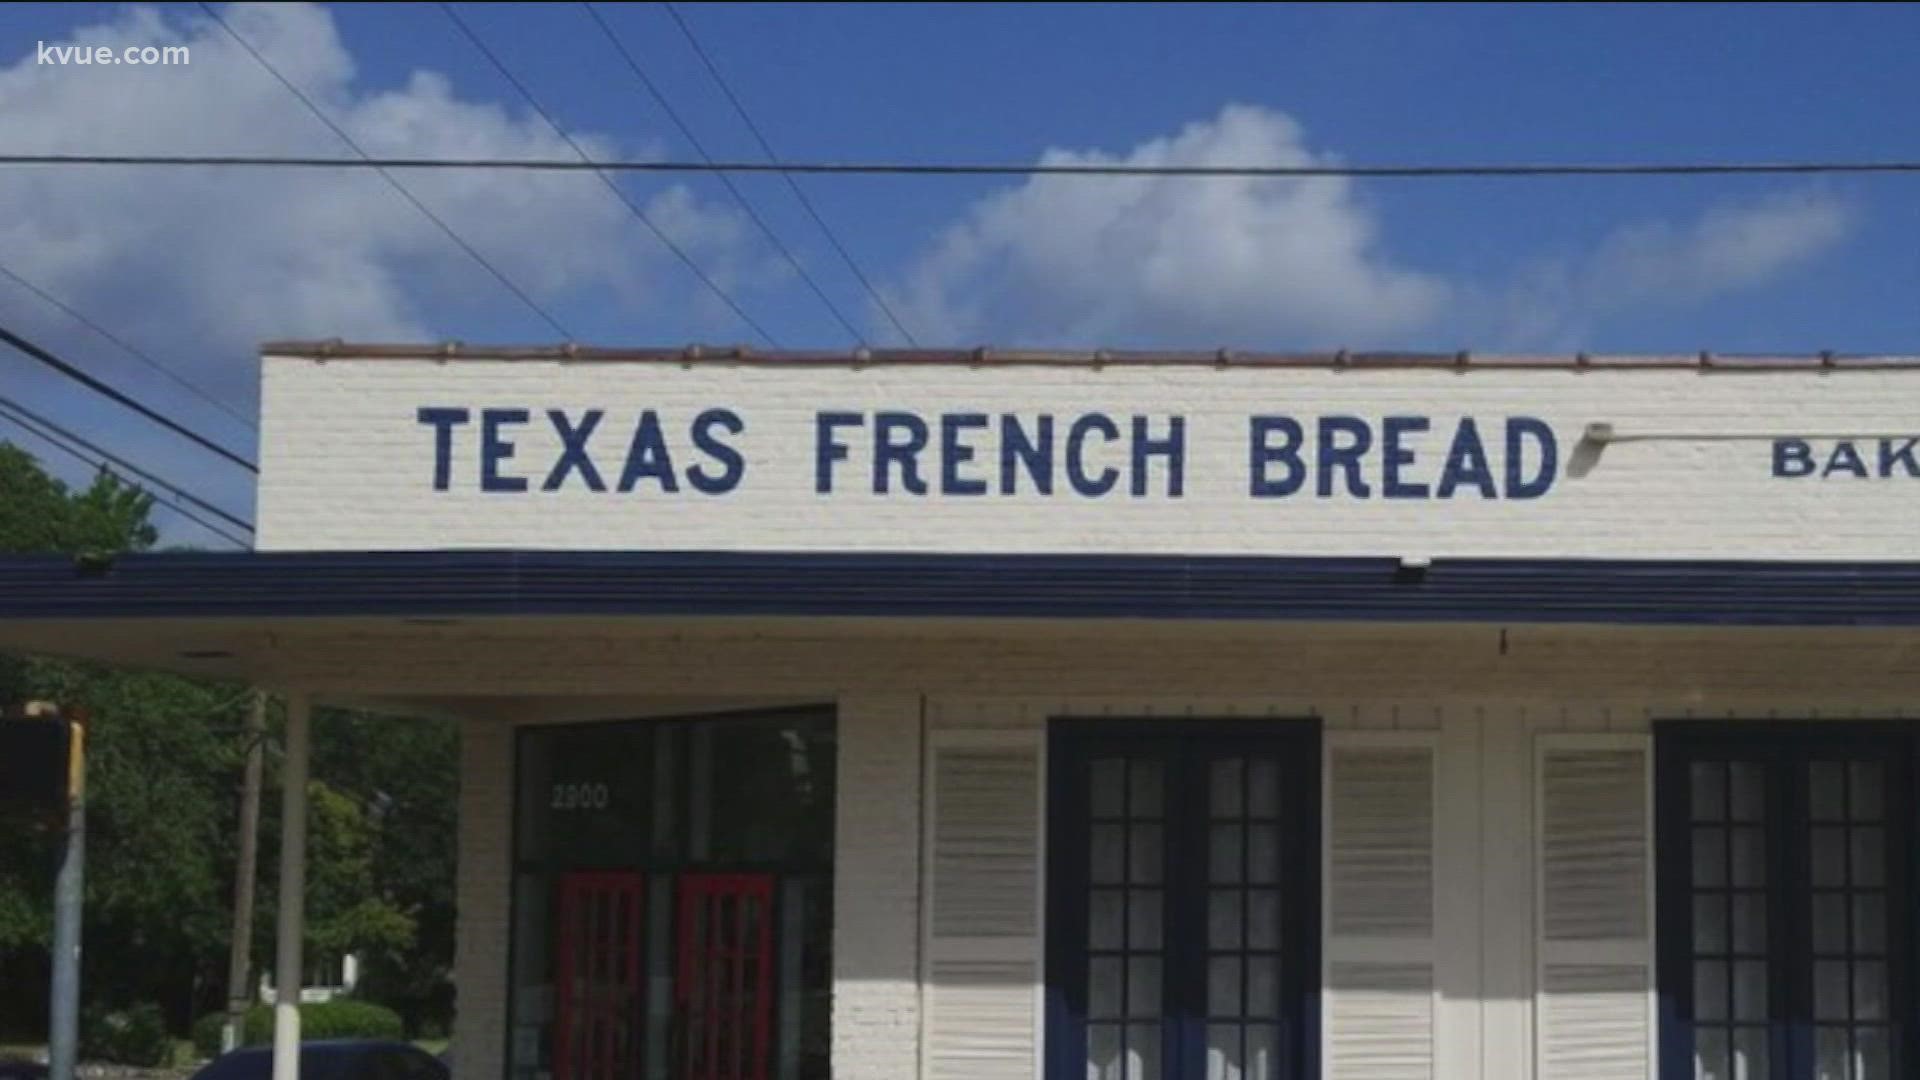 We remember the history of Texas French Bread after the popular bakery burned down on Tuesday.